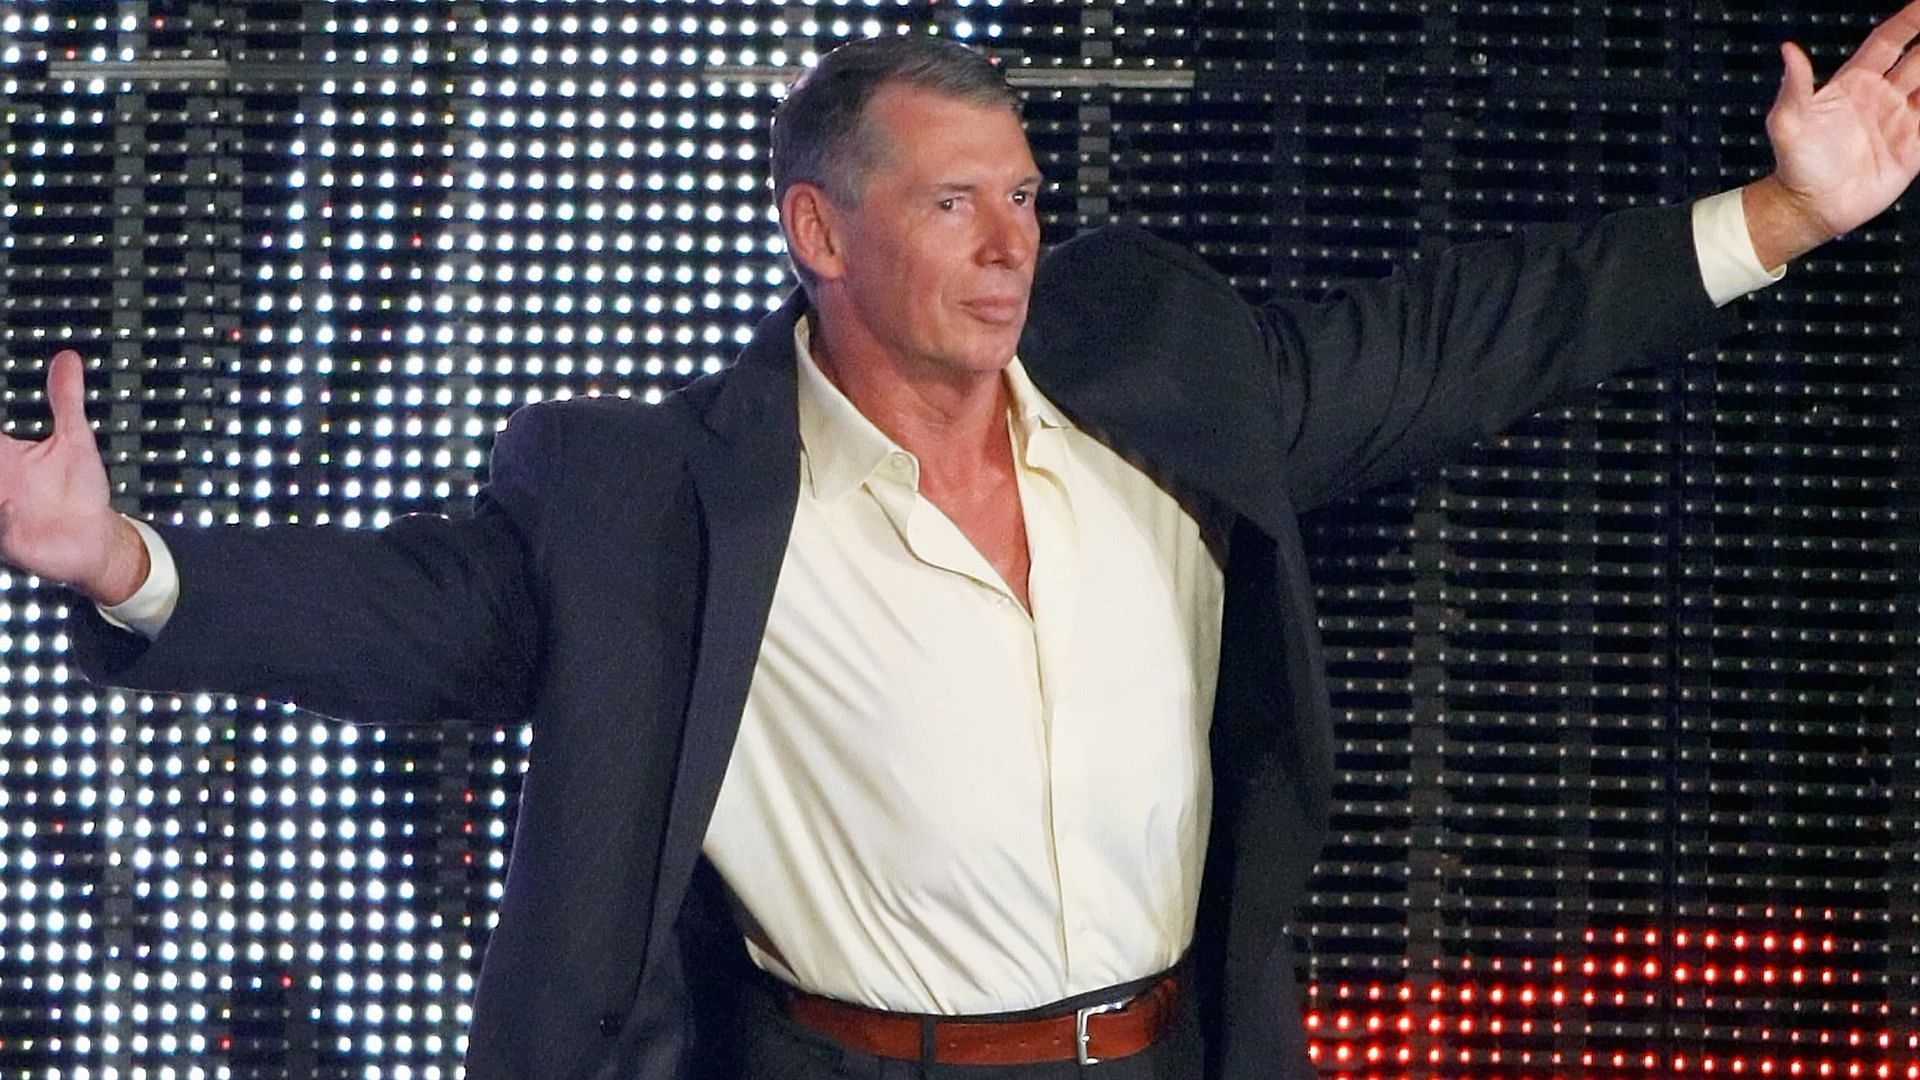 Did Vince McMahon and this AEW star get into a real backstage fight?